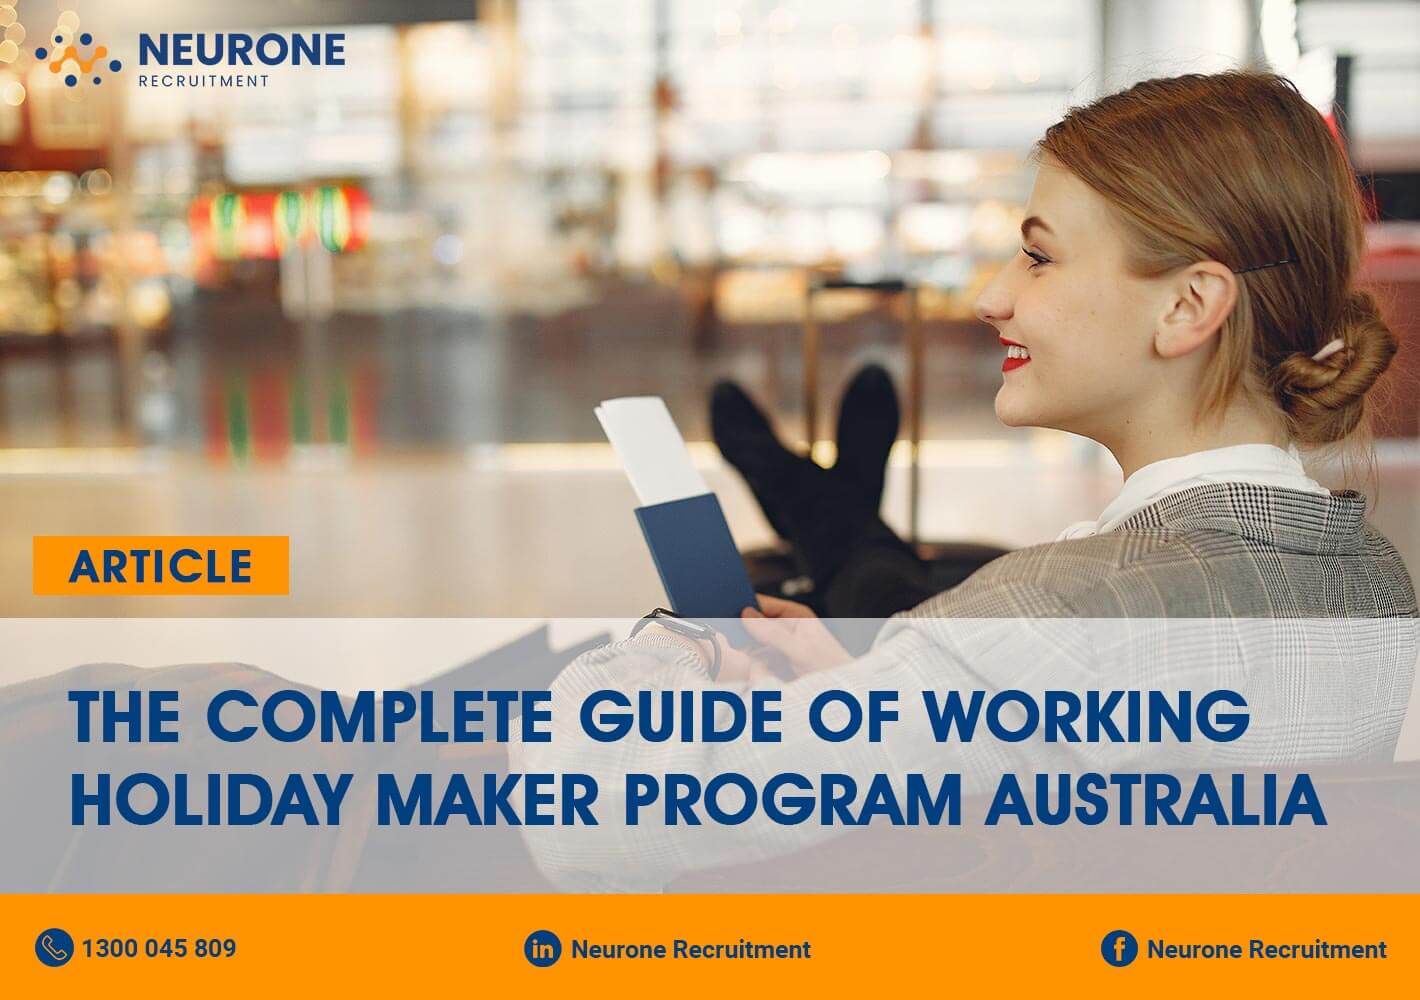 The Complete Guide of Working Holiday Maker Program Australia